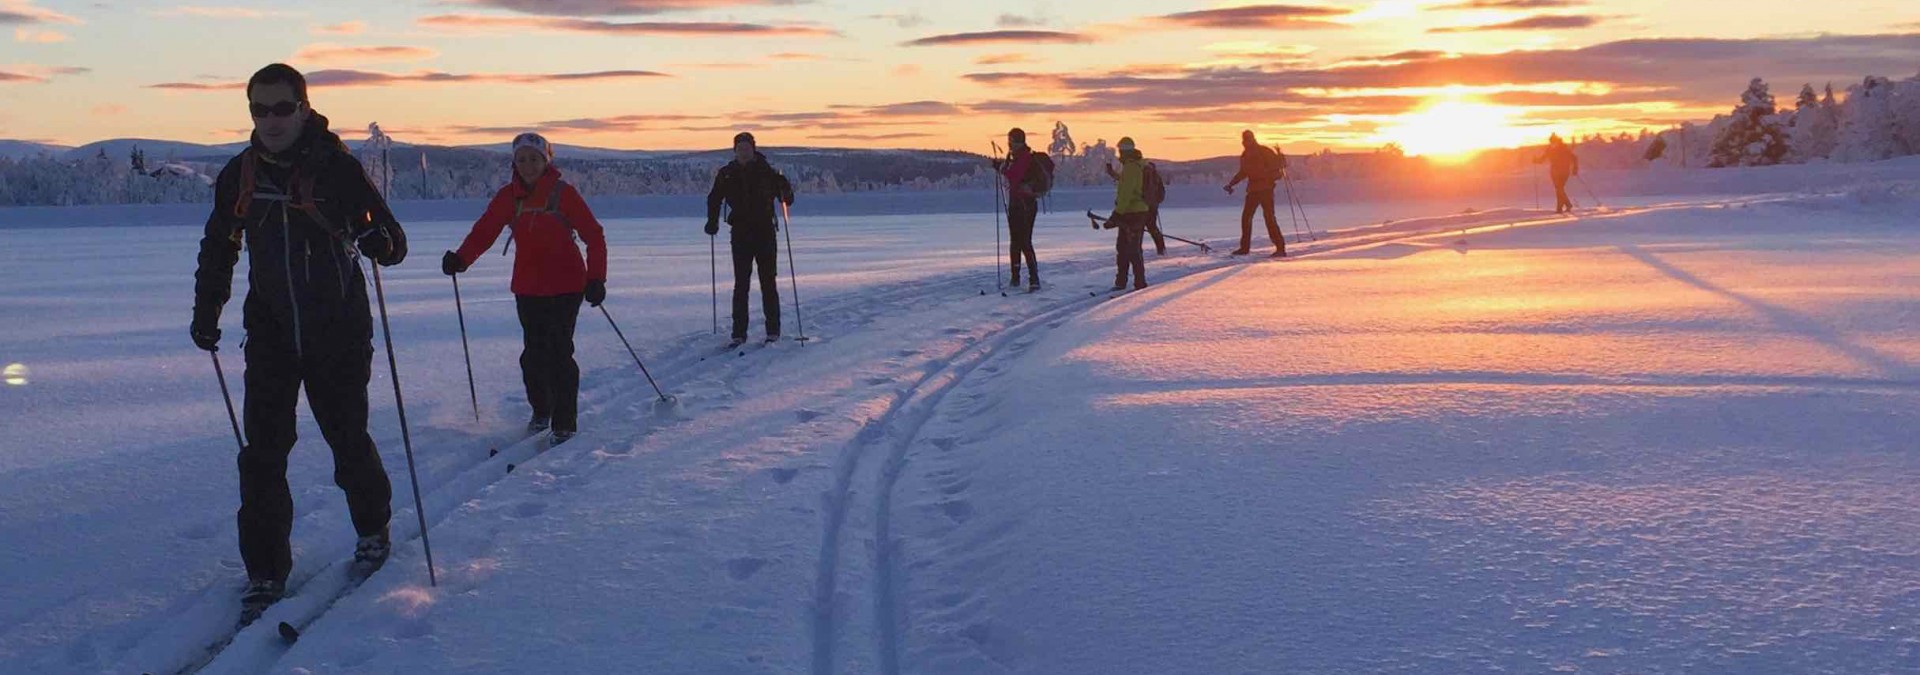 Nordic in Norway: Venabu - The sun sets on another fine day